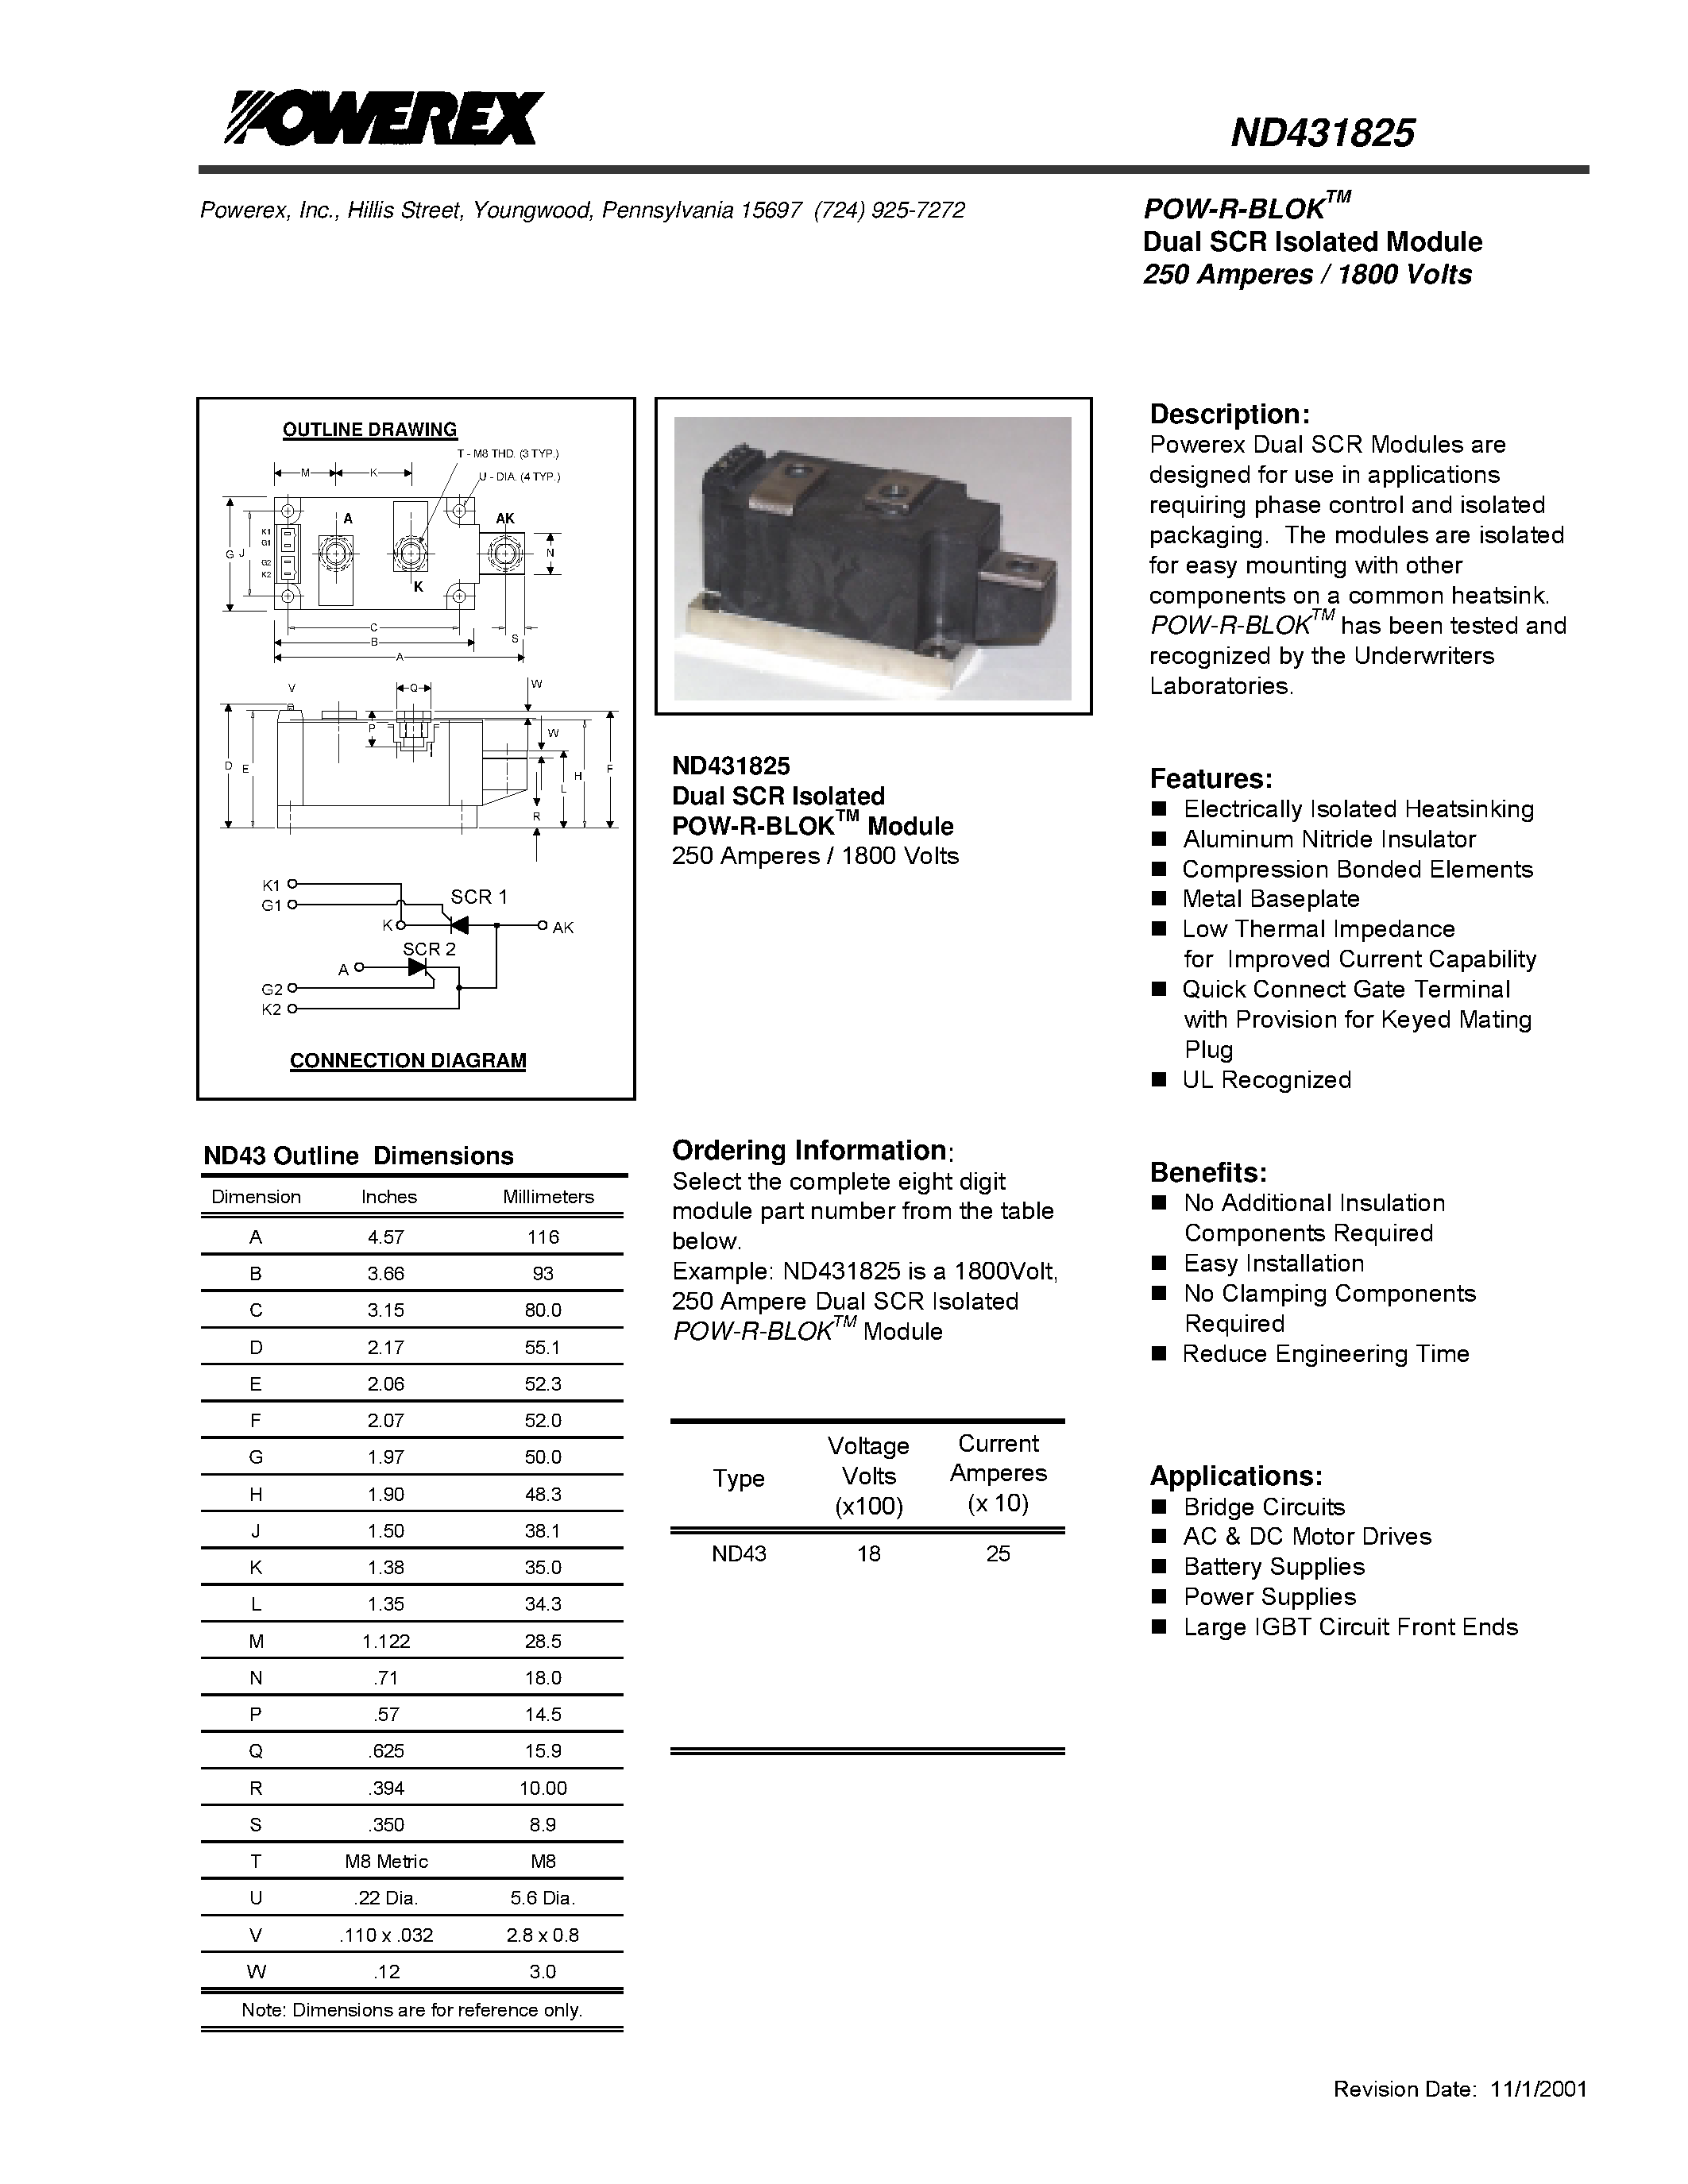 Datasheet ND431825 - POW-R-BLOK Dual SCR Isolated Module (250 Amperes / 1800 Volts) page 1